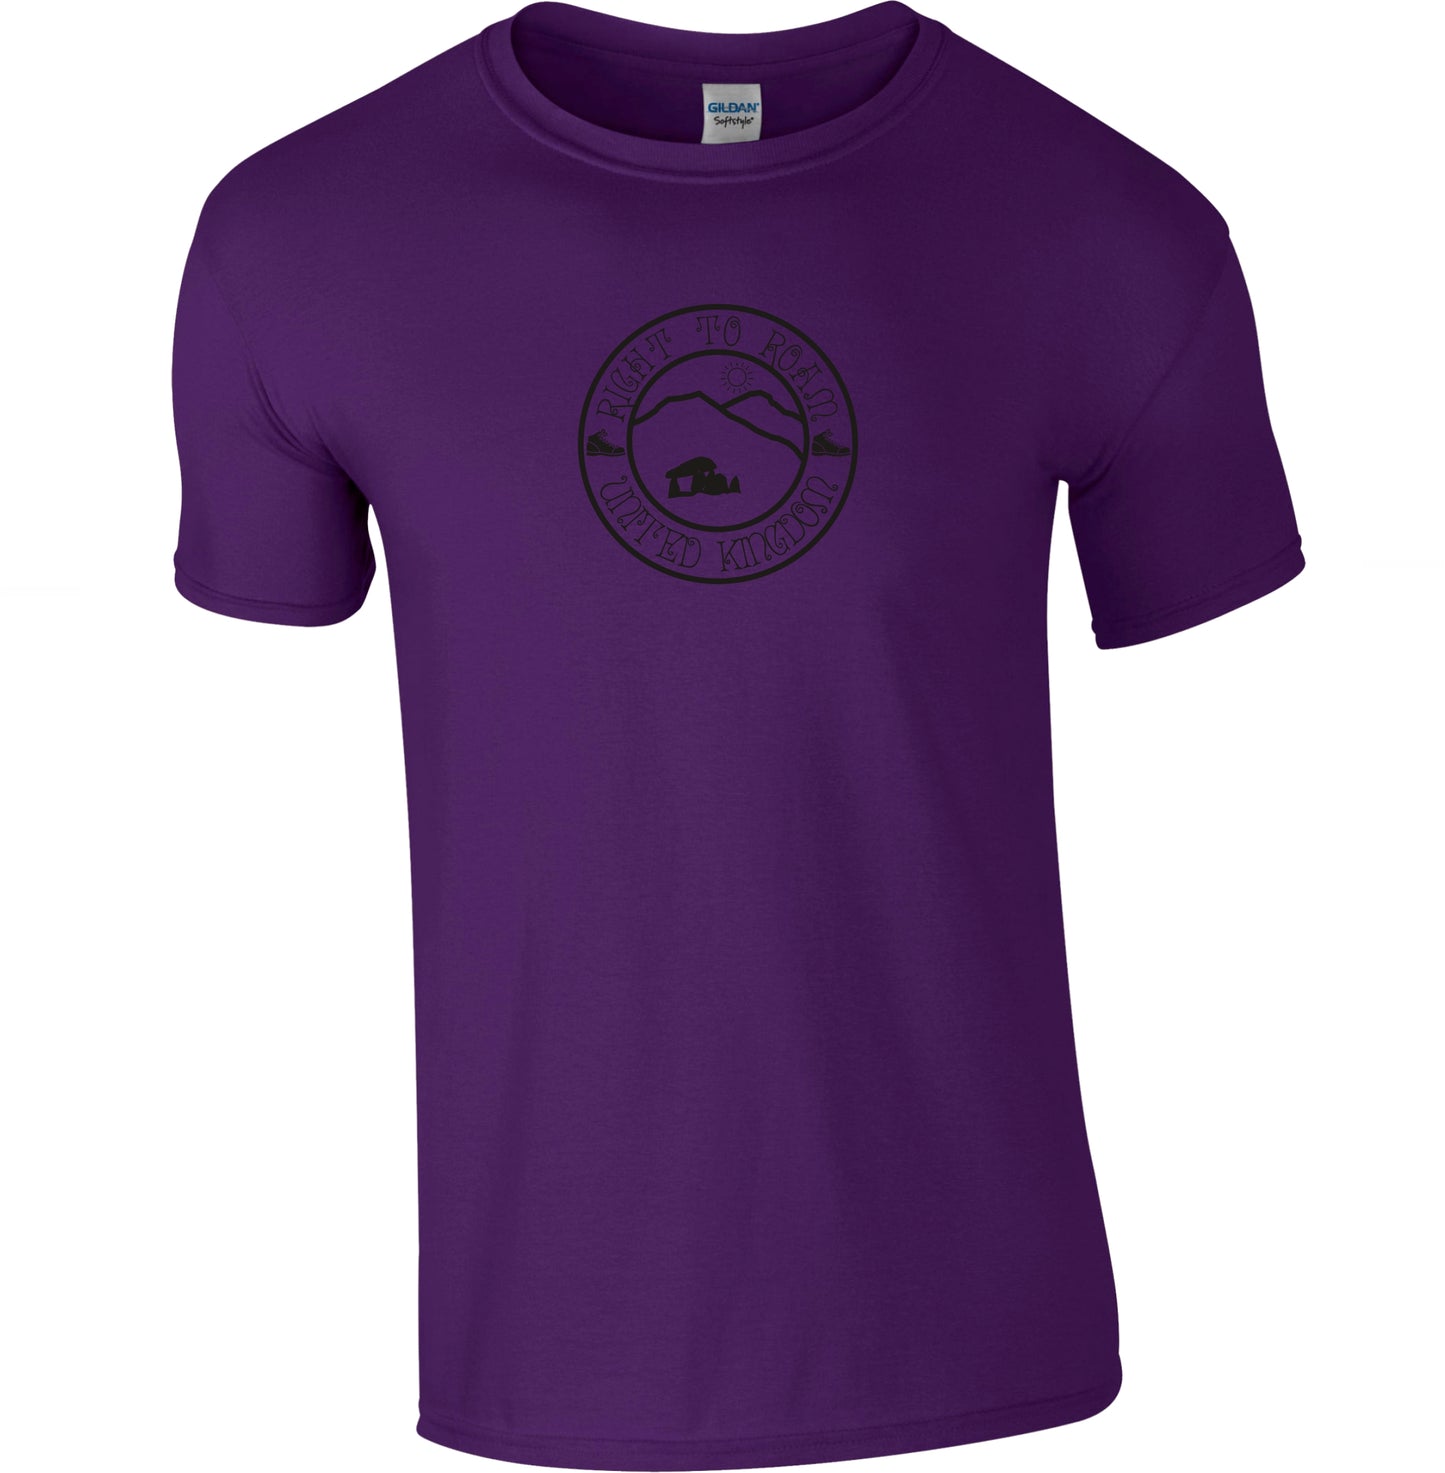 Right To Roam T-Shirt - Hiking, Protest, Trail, Various Colours